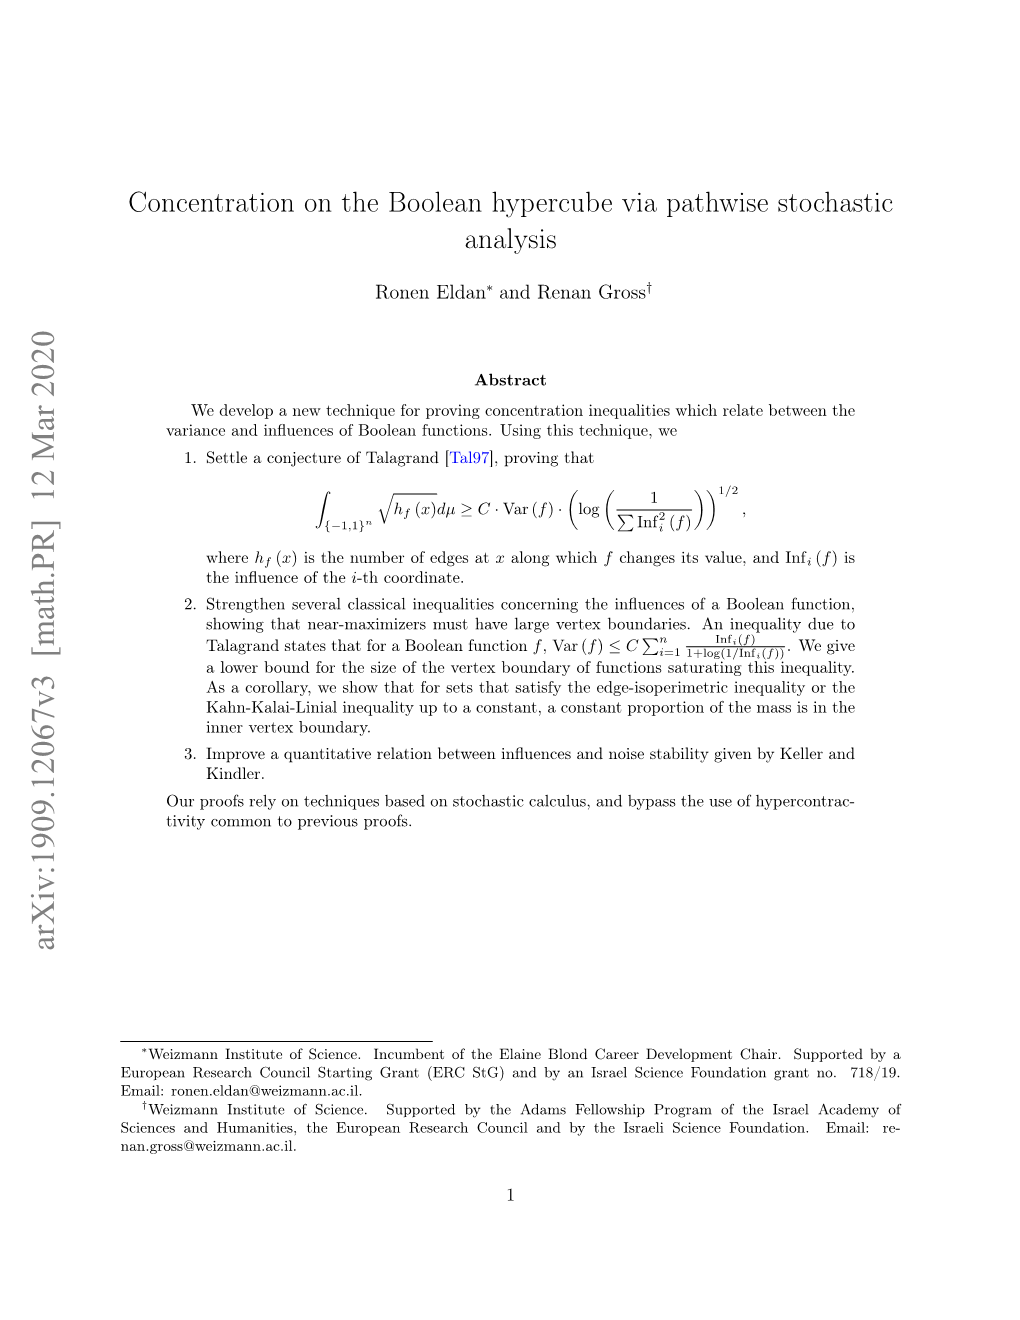 Concentration on the Boolean Hypercube Via Pathwise Stochastic Analysis